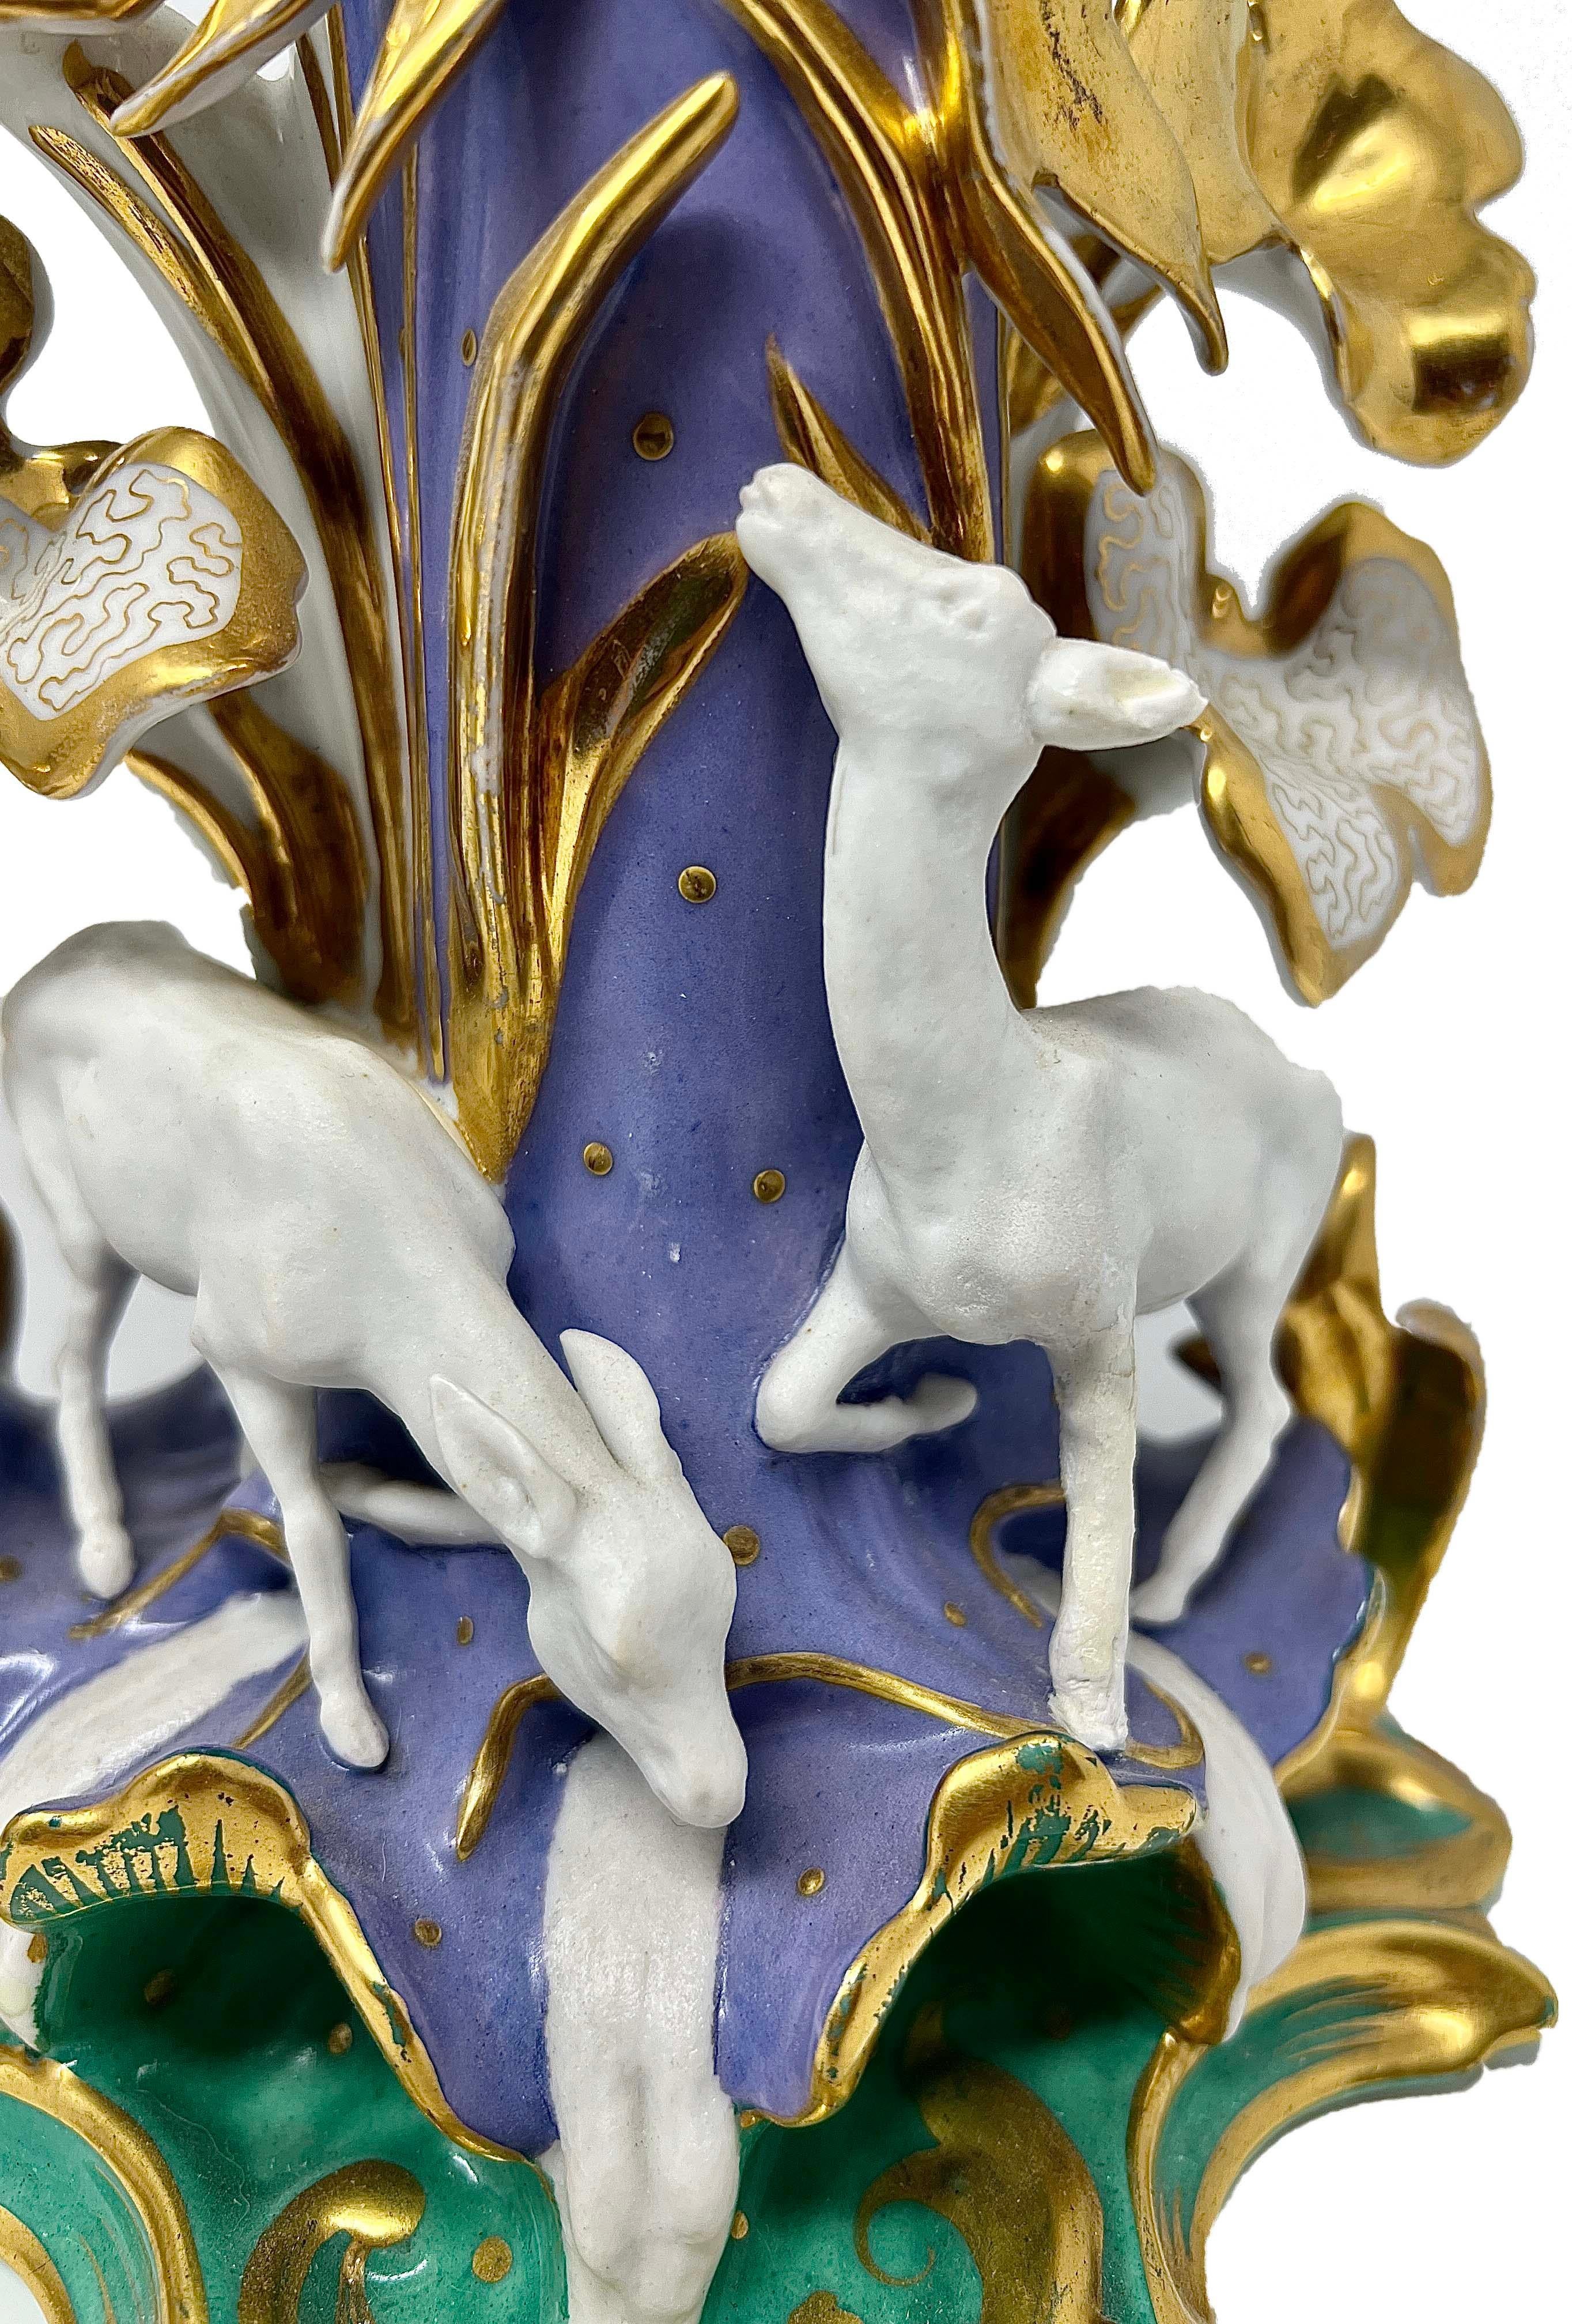 Pair Antique French Vieux Paris Porcelain Lavender Vases, Circa 1840-1860.
Hand-Painted colors of lavender, green and gold with flora and fauna.